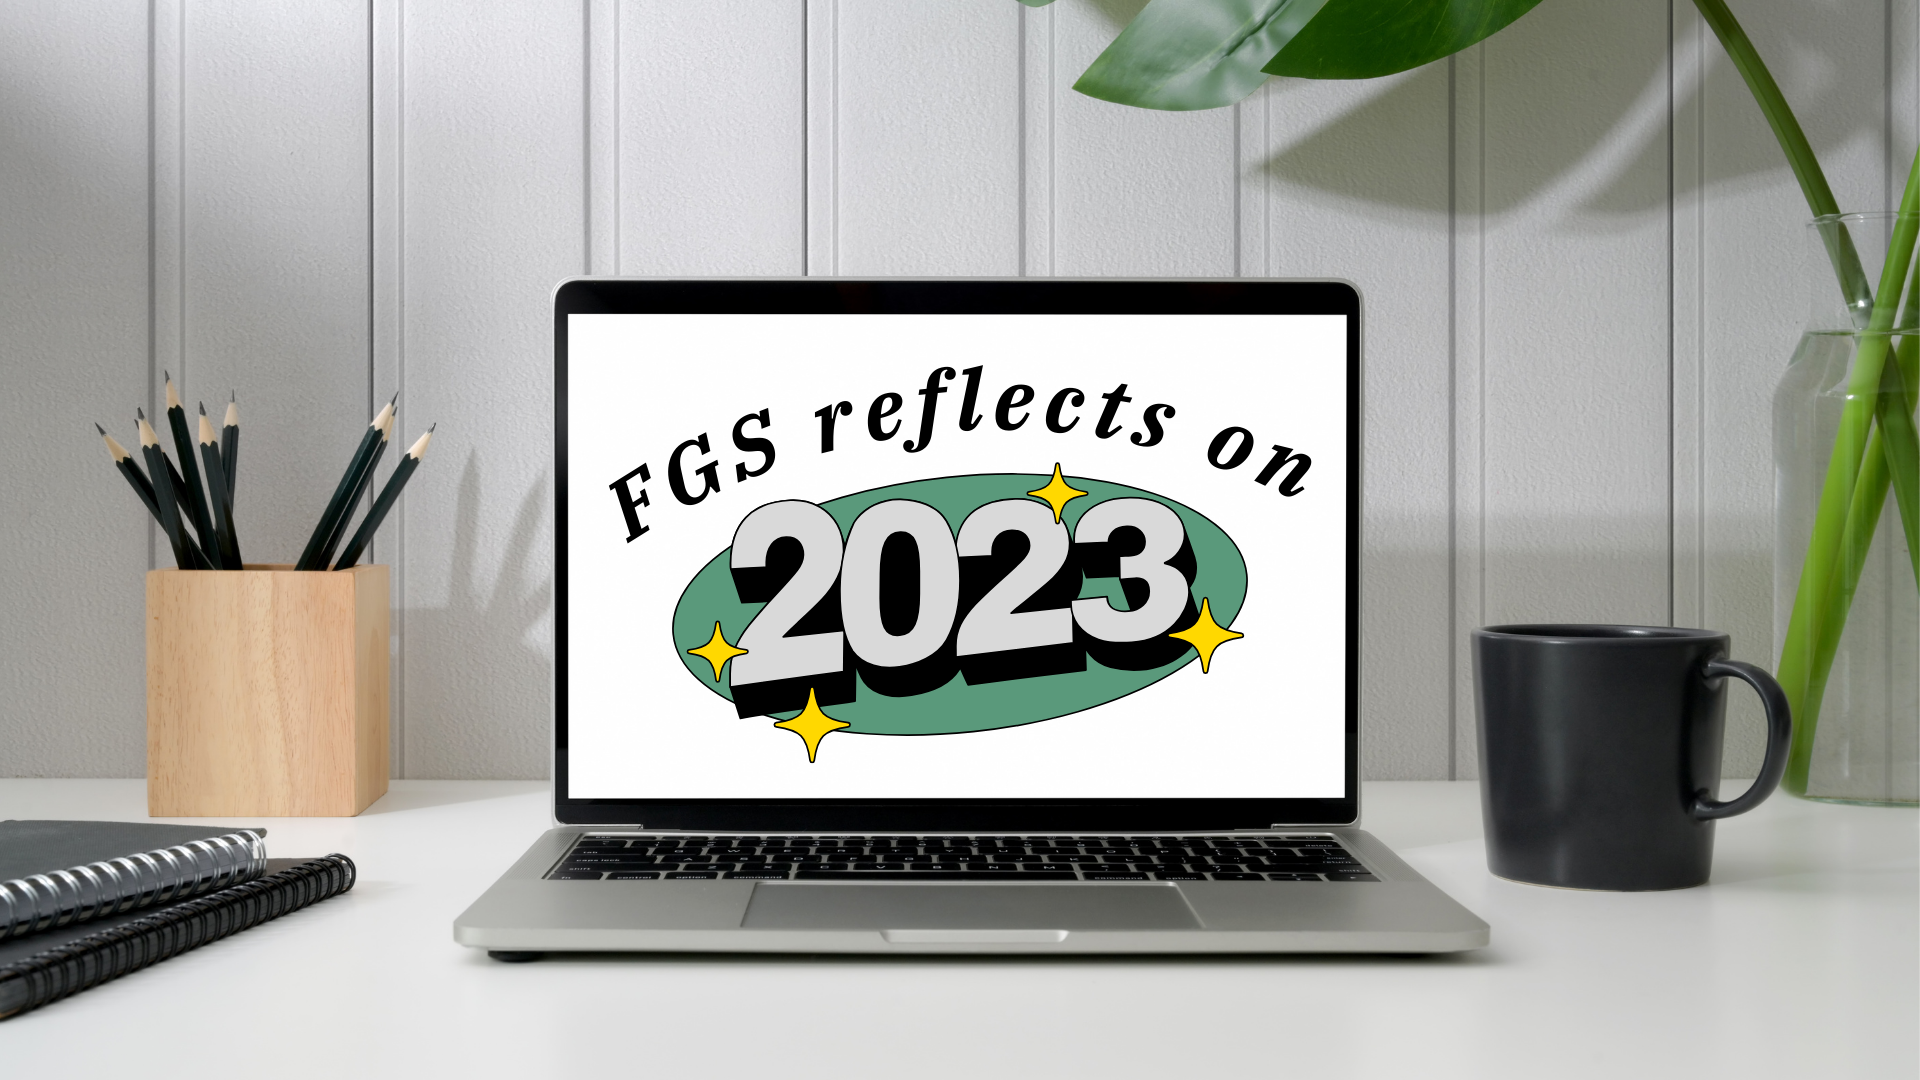 computer on a desk with the words "FGS reflects on 2023" on the computer screen